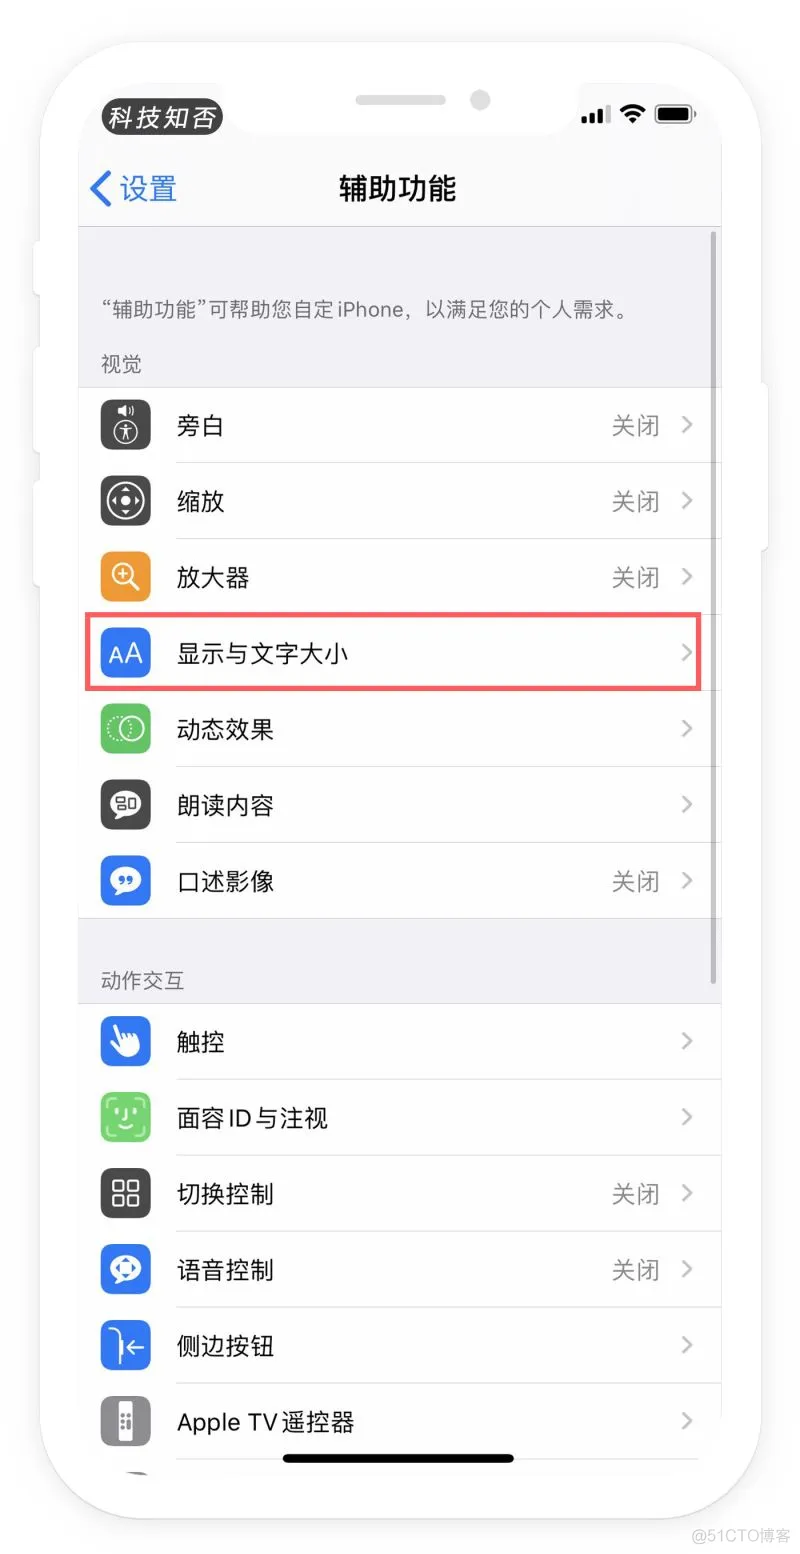 android 打开应用耗电管理界面 开启耗电应用_android 打开应用耗电管理界面_07